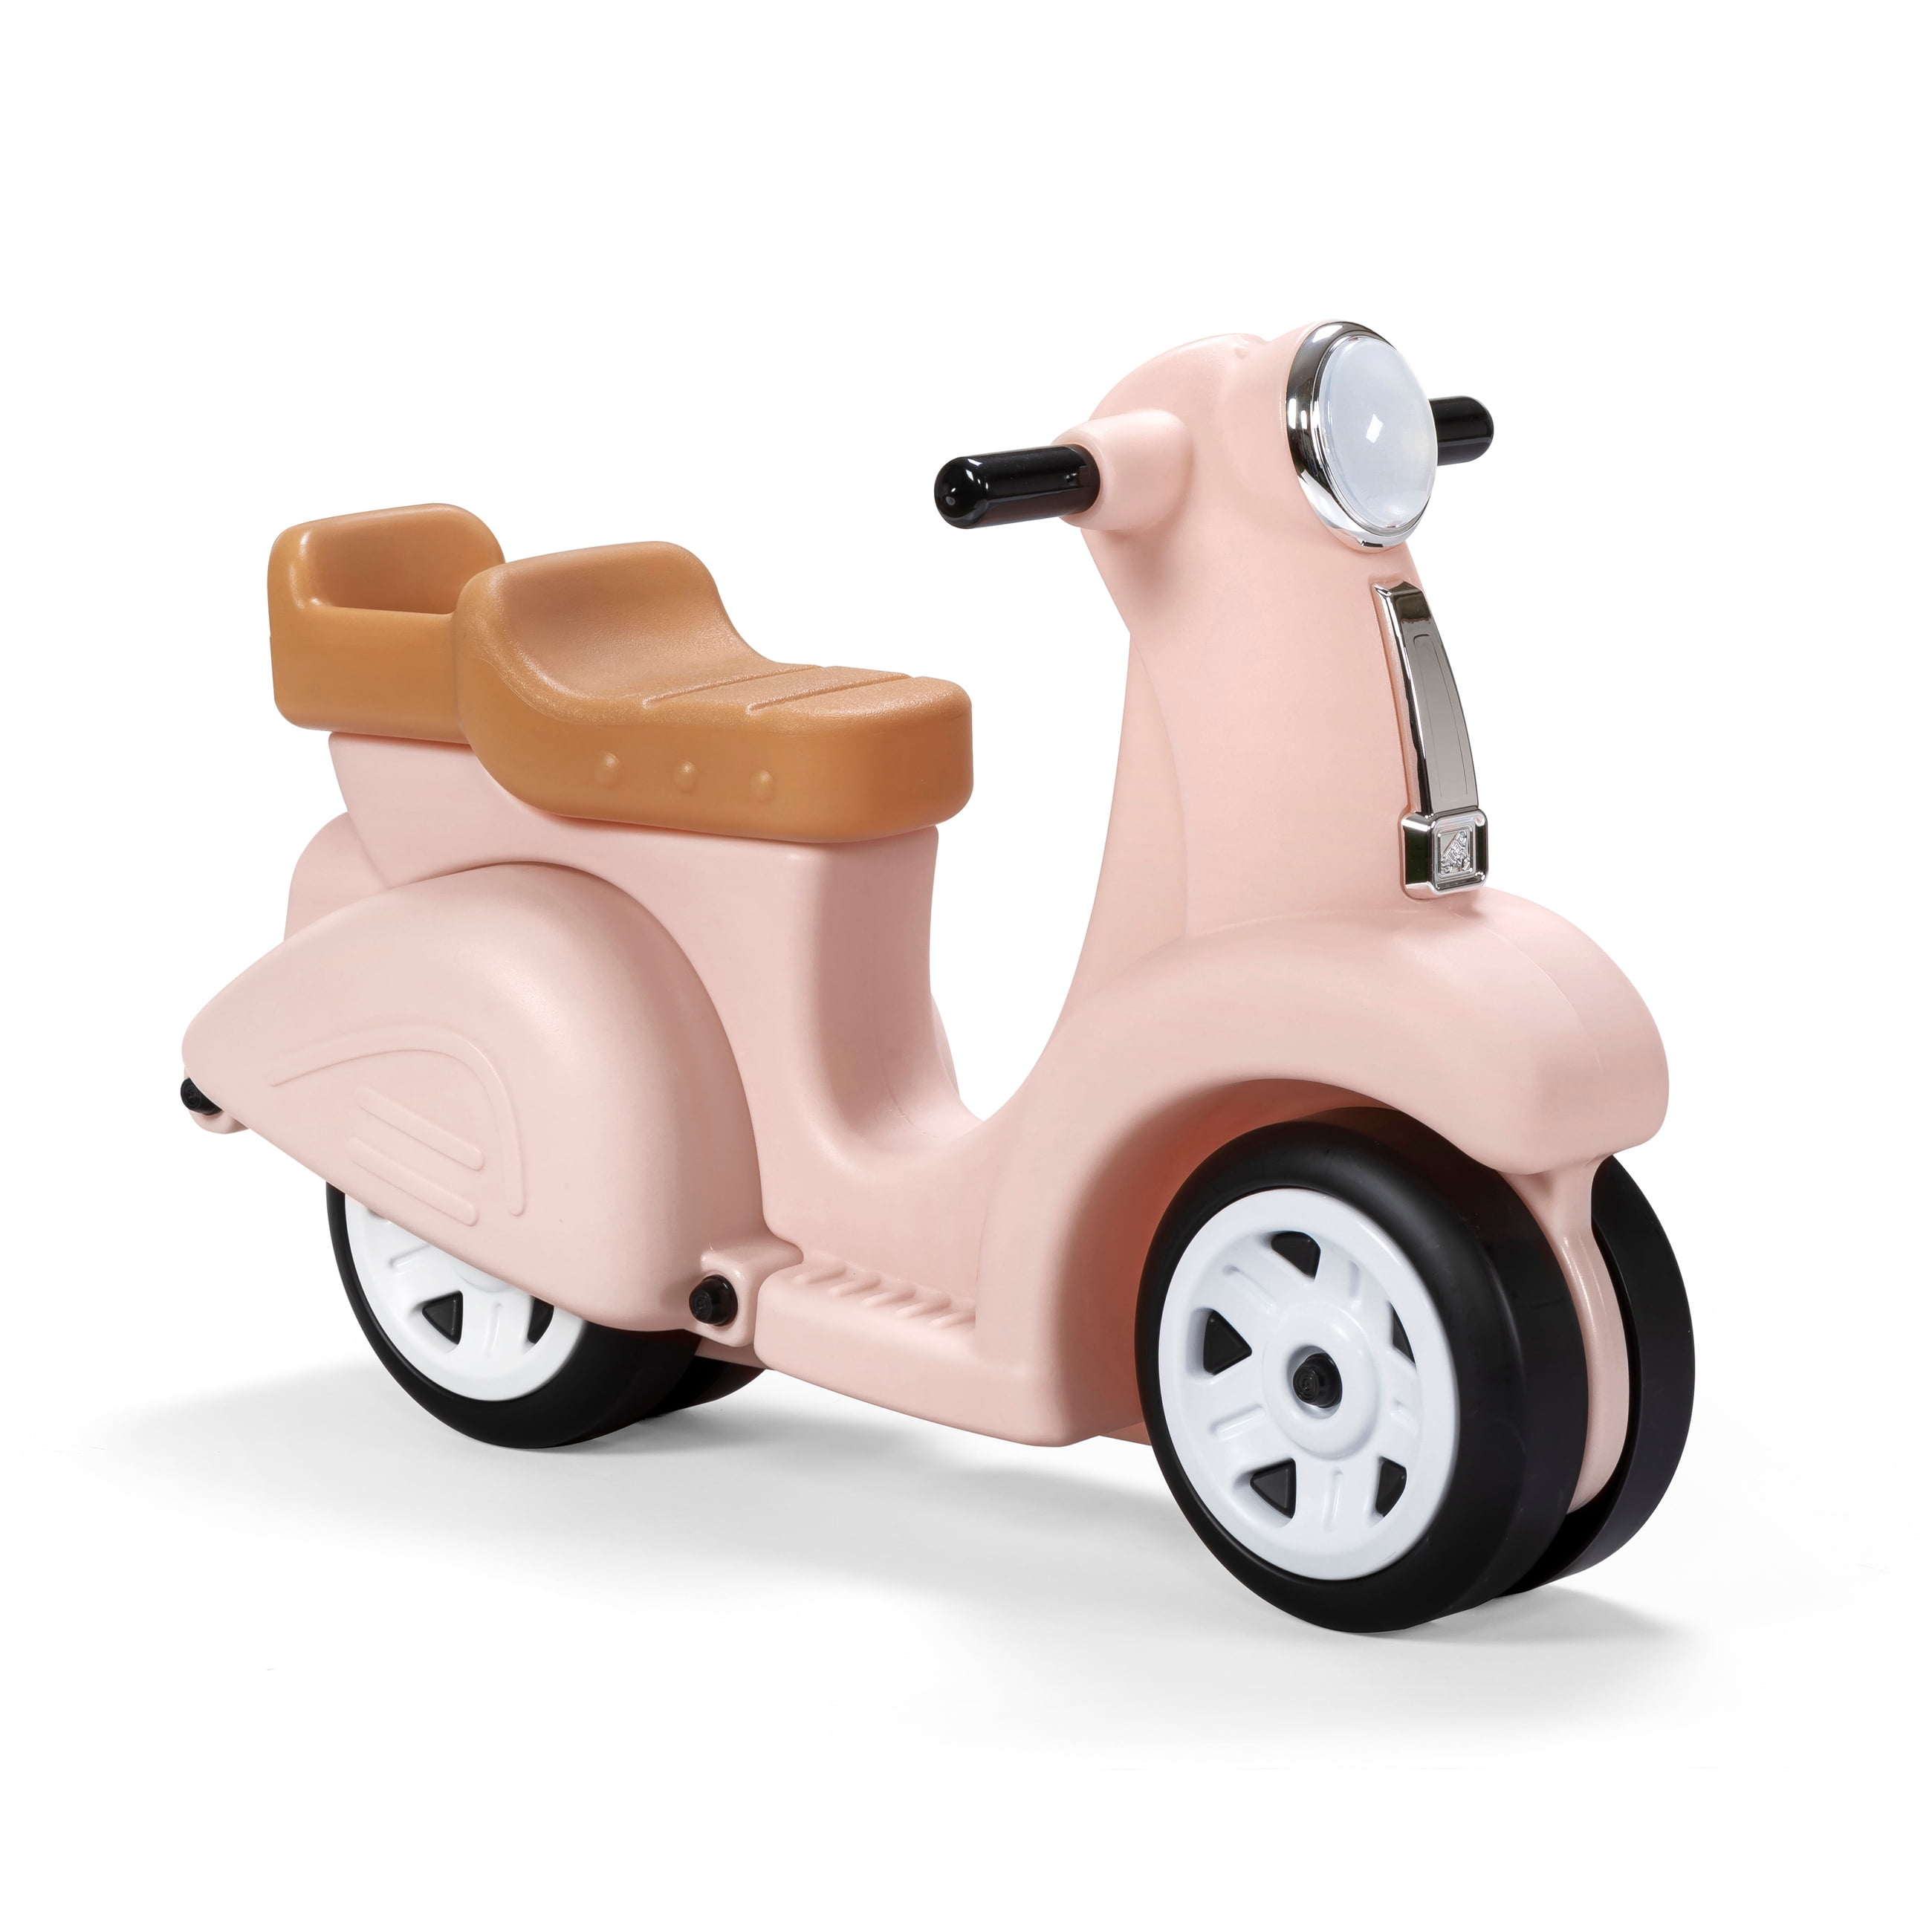 Step2 Ride Along Pink Ride On Toy with Design, Foot-to-Floor Toddler Scooter with Four Wheels for Stability Walmart.com